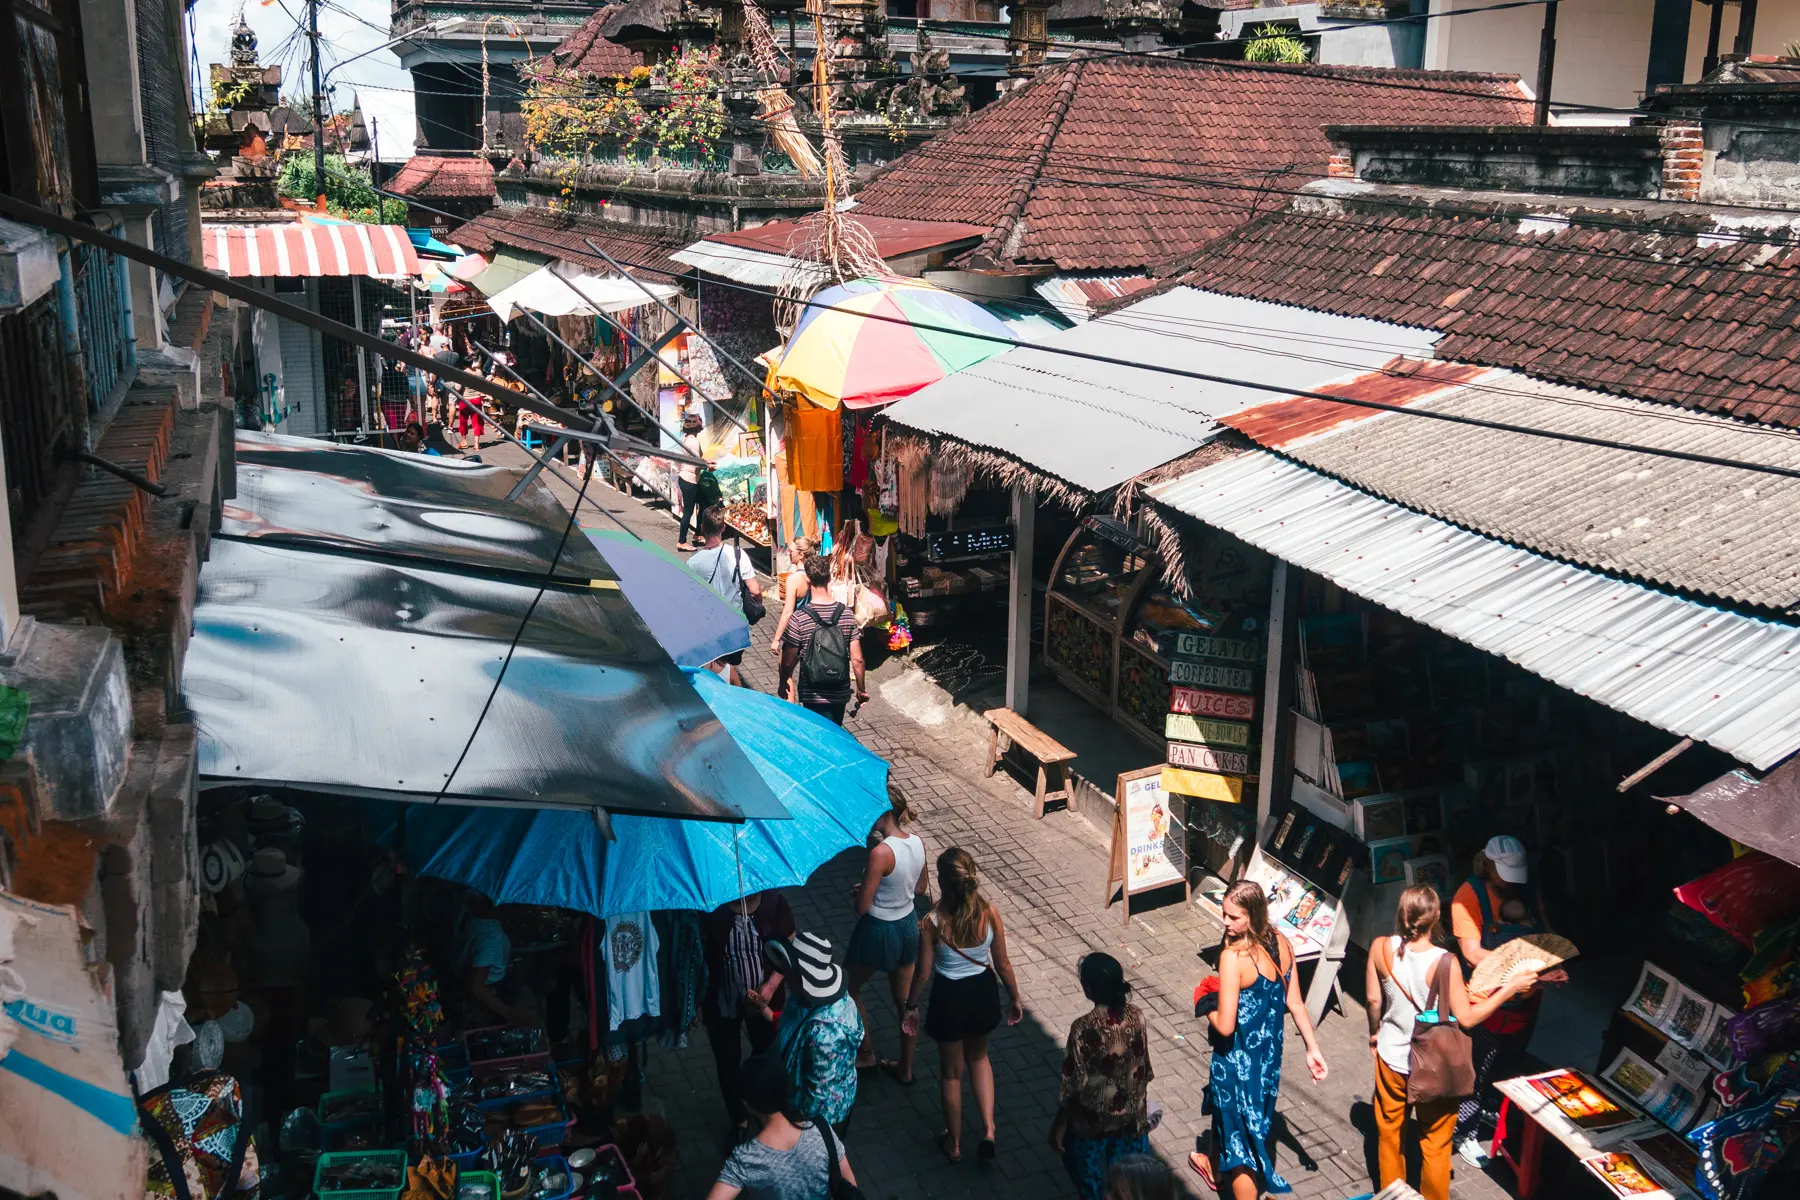 Looking down on people walking down one of the alleys lined by stalls at Ubud Art Market.